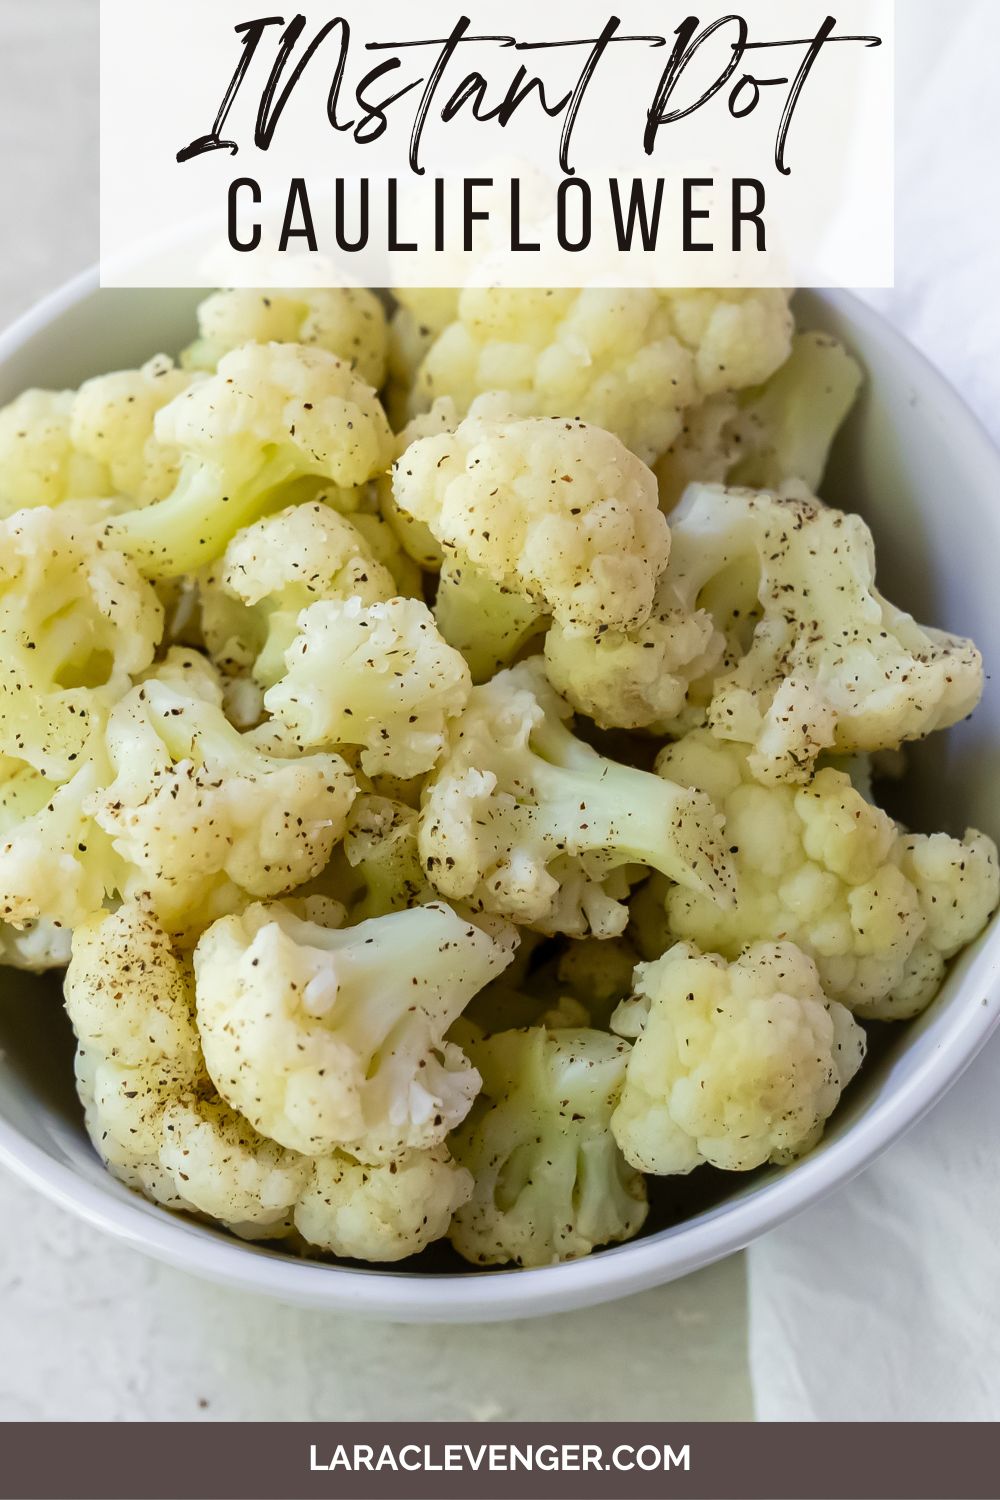 Pinable image of cauliflower sitting in a ceramic bowl on a white countertop